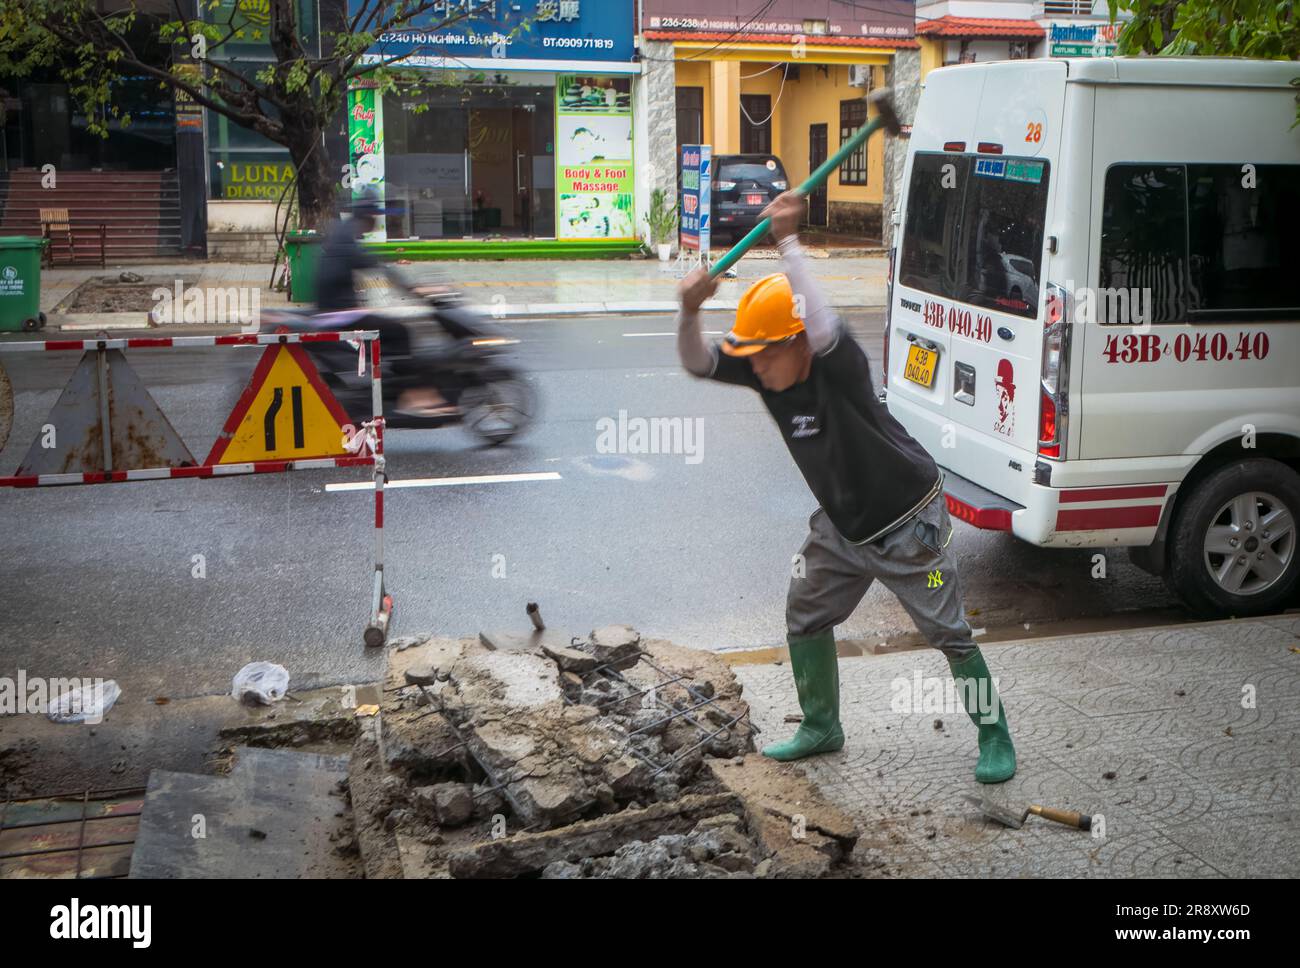 A worker smashes concrete with a sledgehammer on the pavement in Danang, Vietnam. Stock Photo